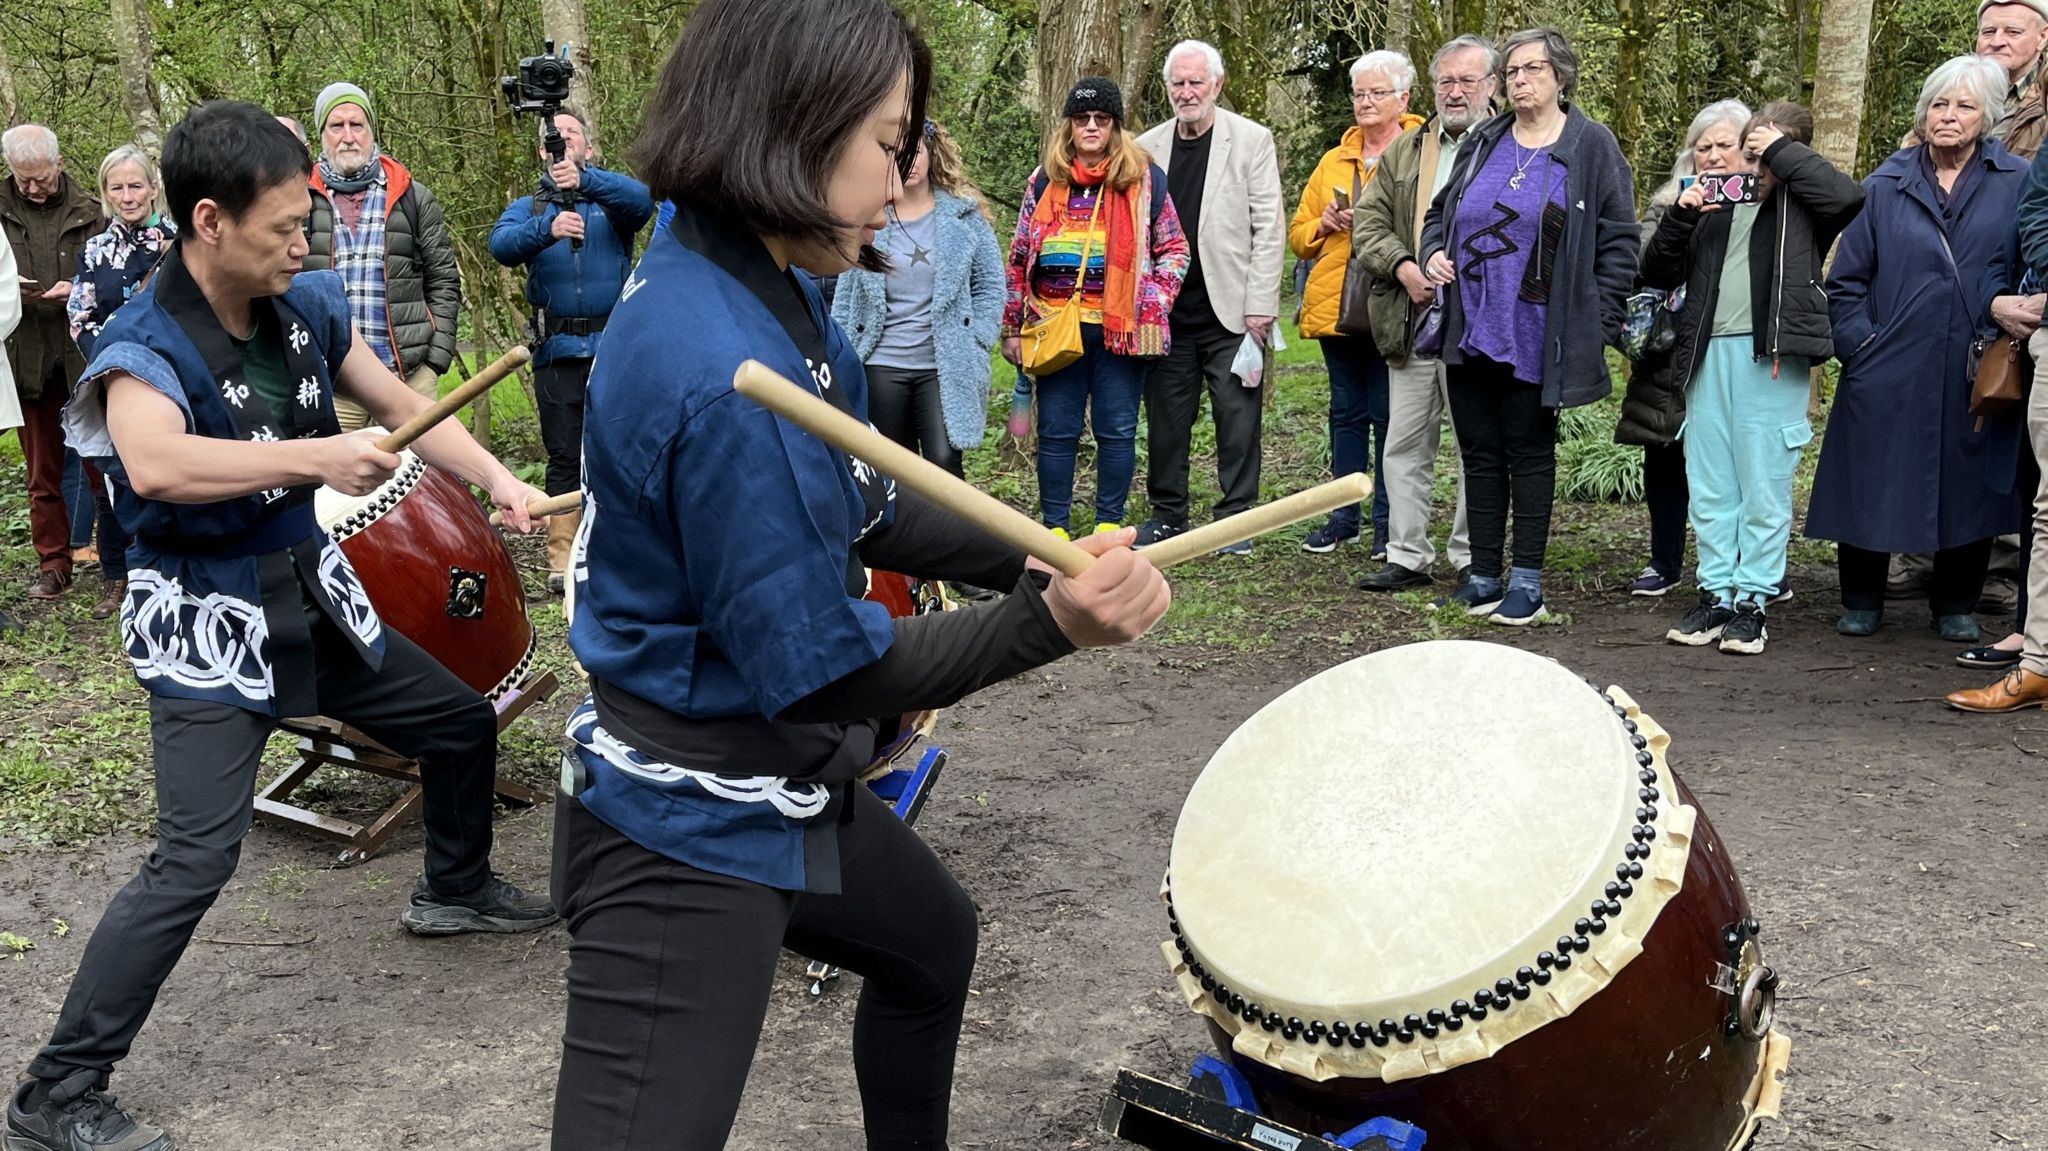 Two Japanese drummers playing their drums to the crowd that gathered on the bank of the river Marden